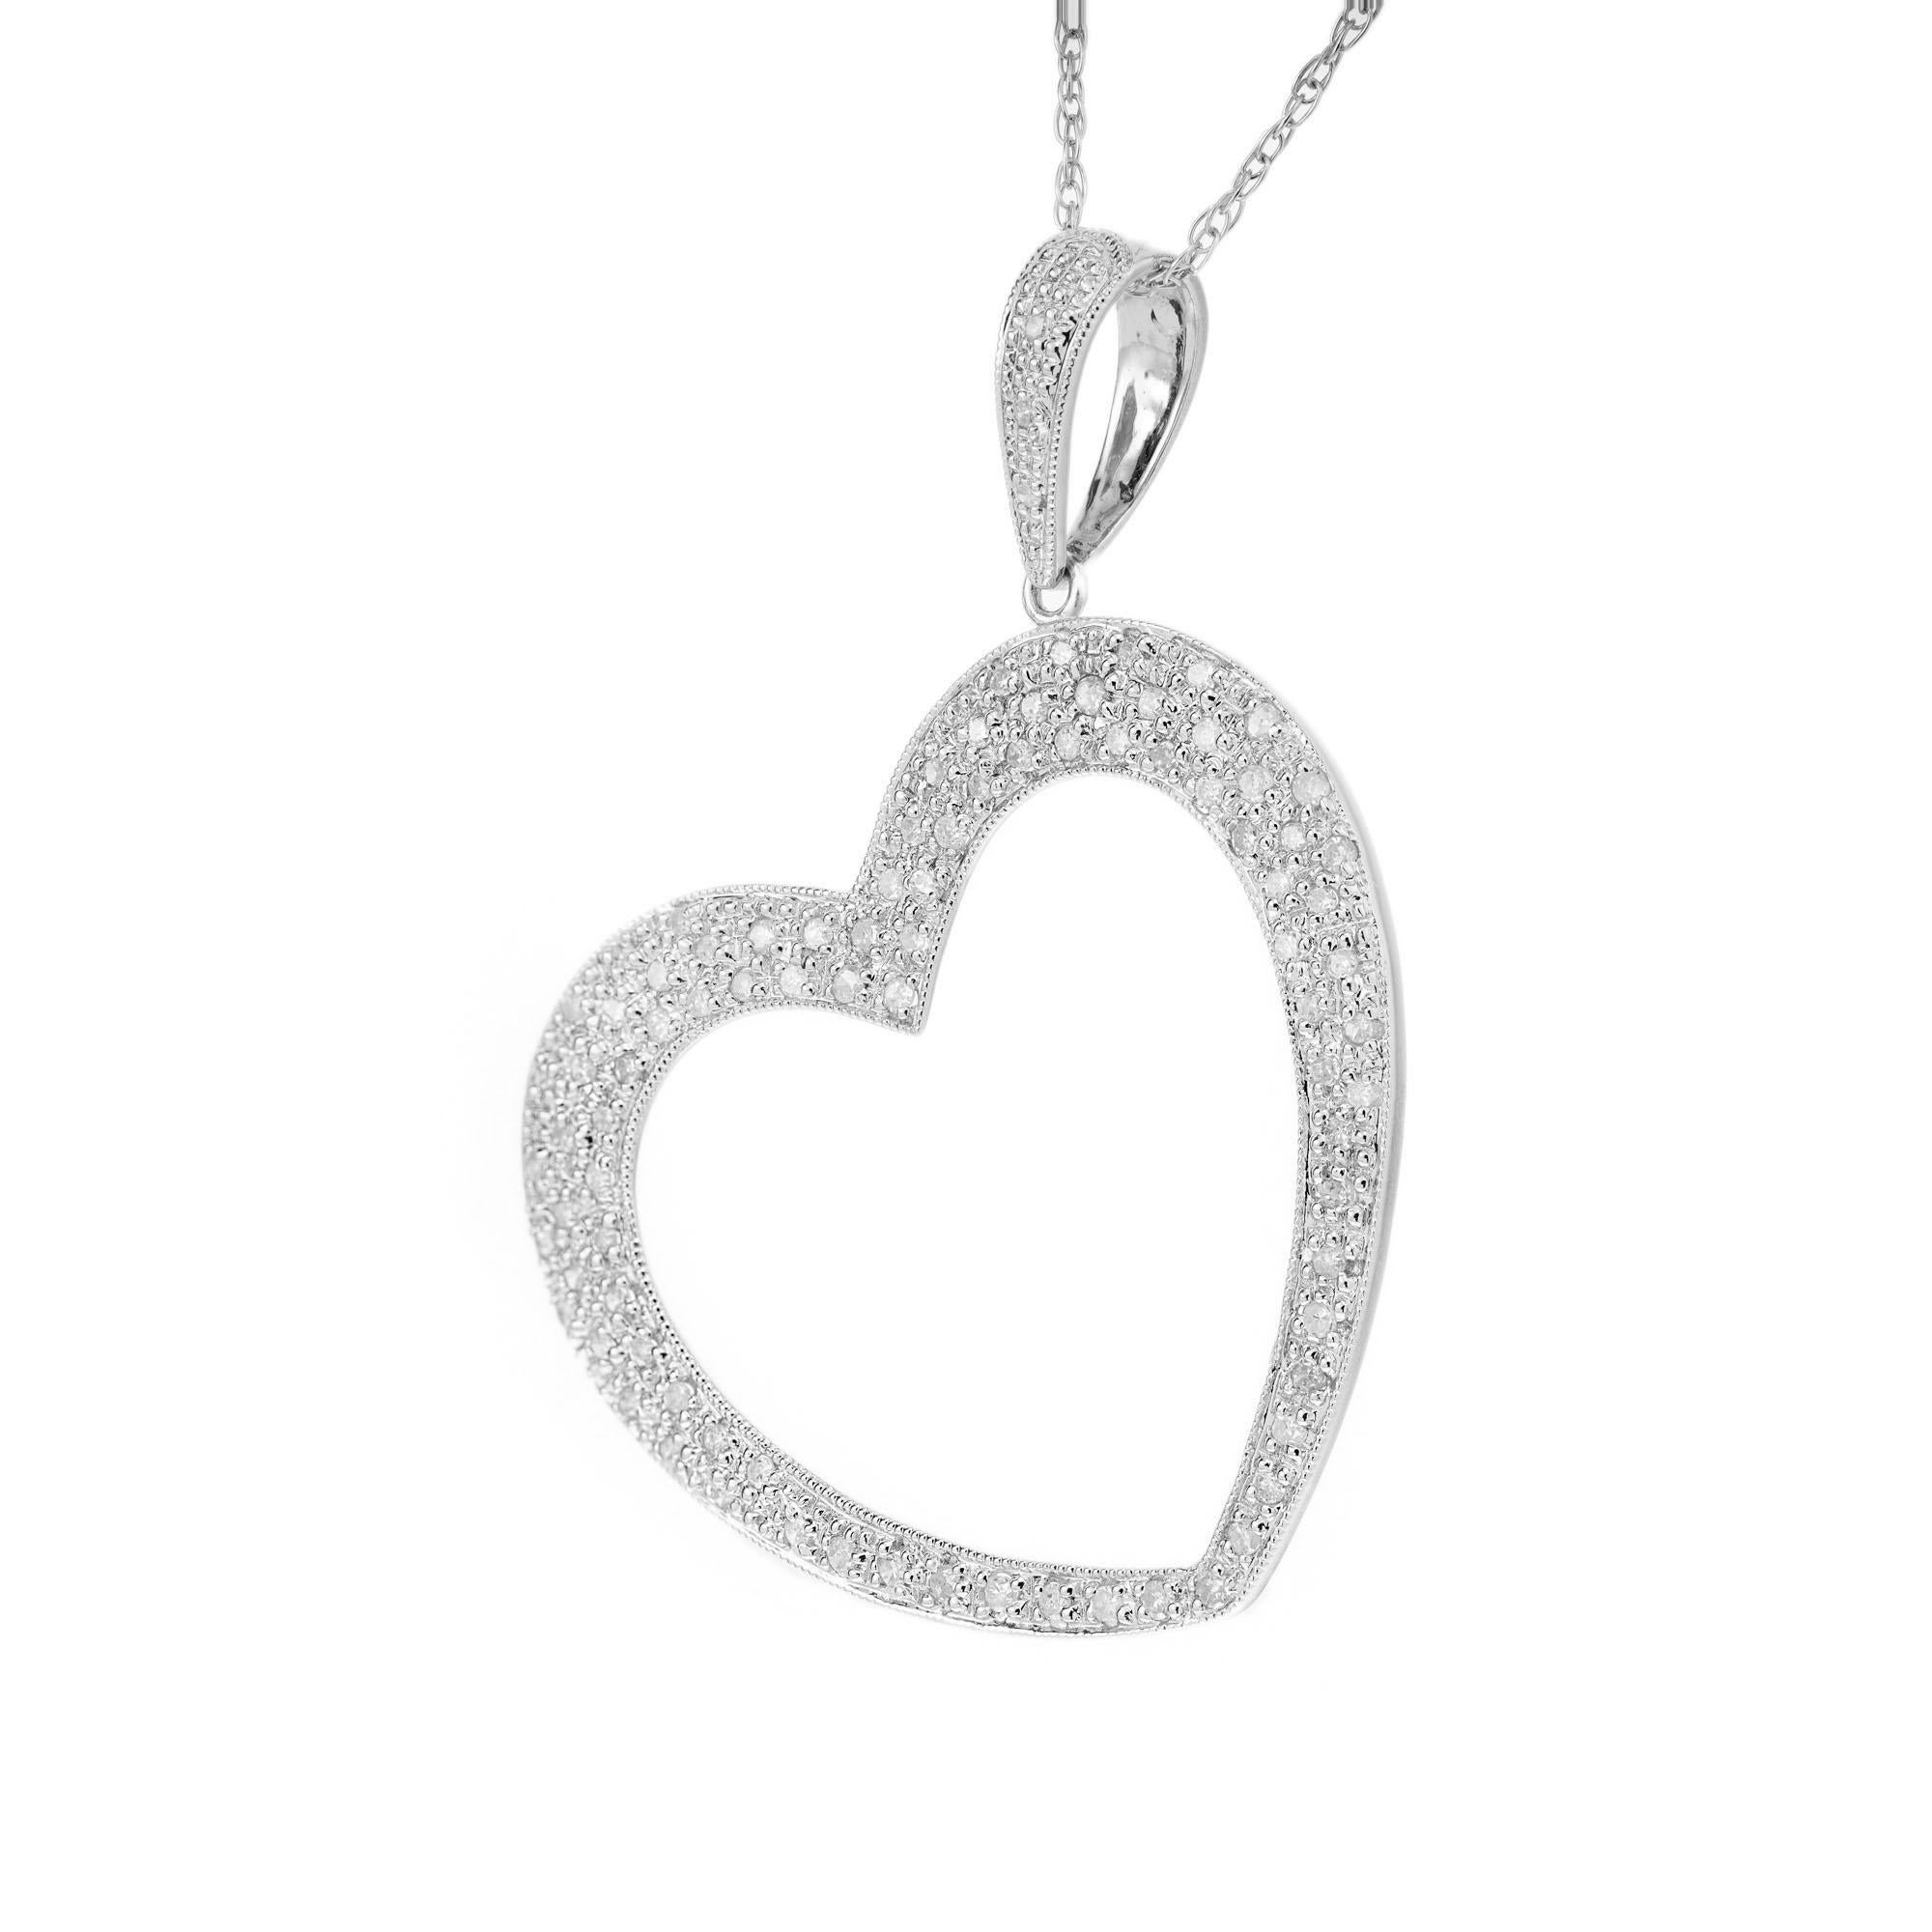 Large diamond heart pendant necklace. 100 round diamonds pave set in a heart shape 14k white gold setting. 17.5 long link chain.  The bail is set off to the side. 

100 round diamonds approx. total weight .65cts, G, SI.  
14k white gold 
Stamped: